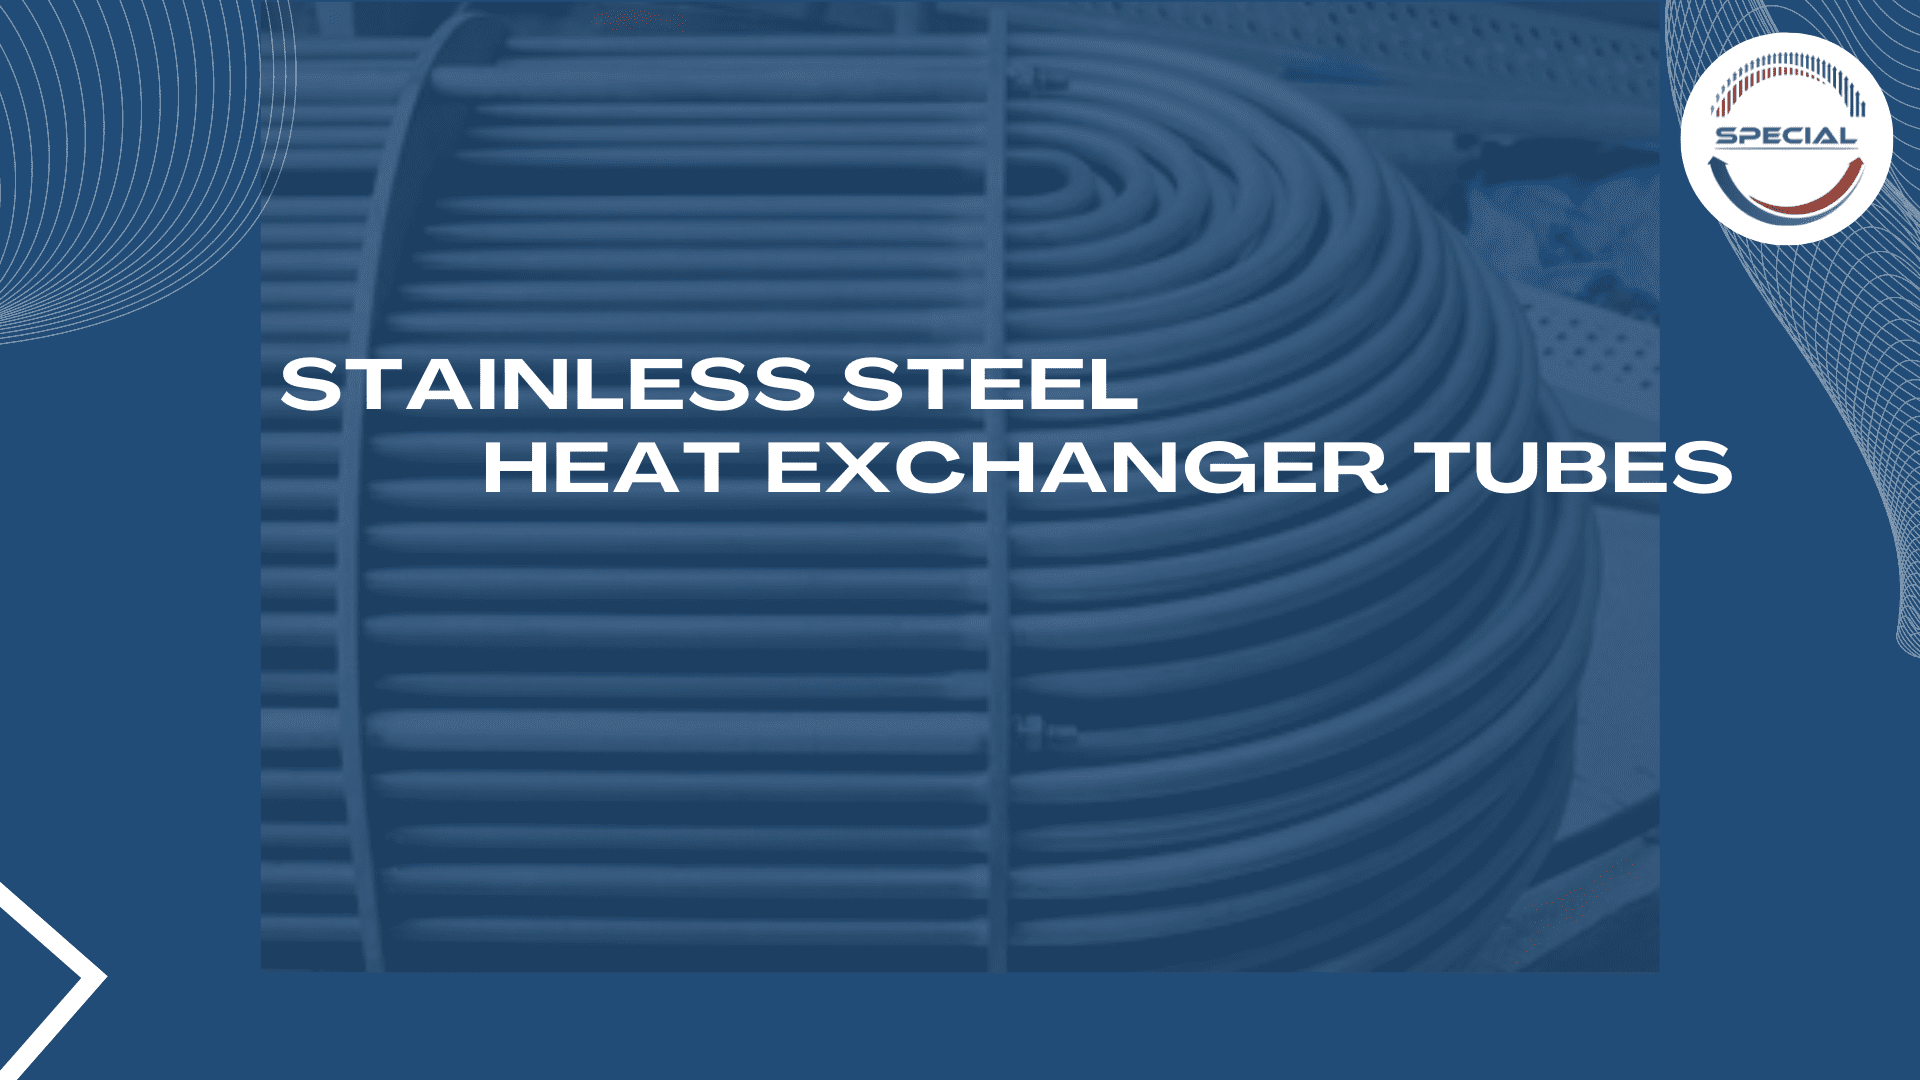 Stainless Steel Heat Exchanger Tubes﻿